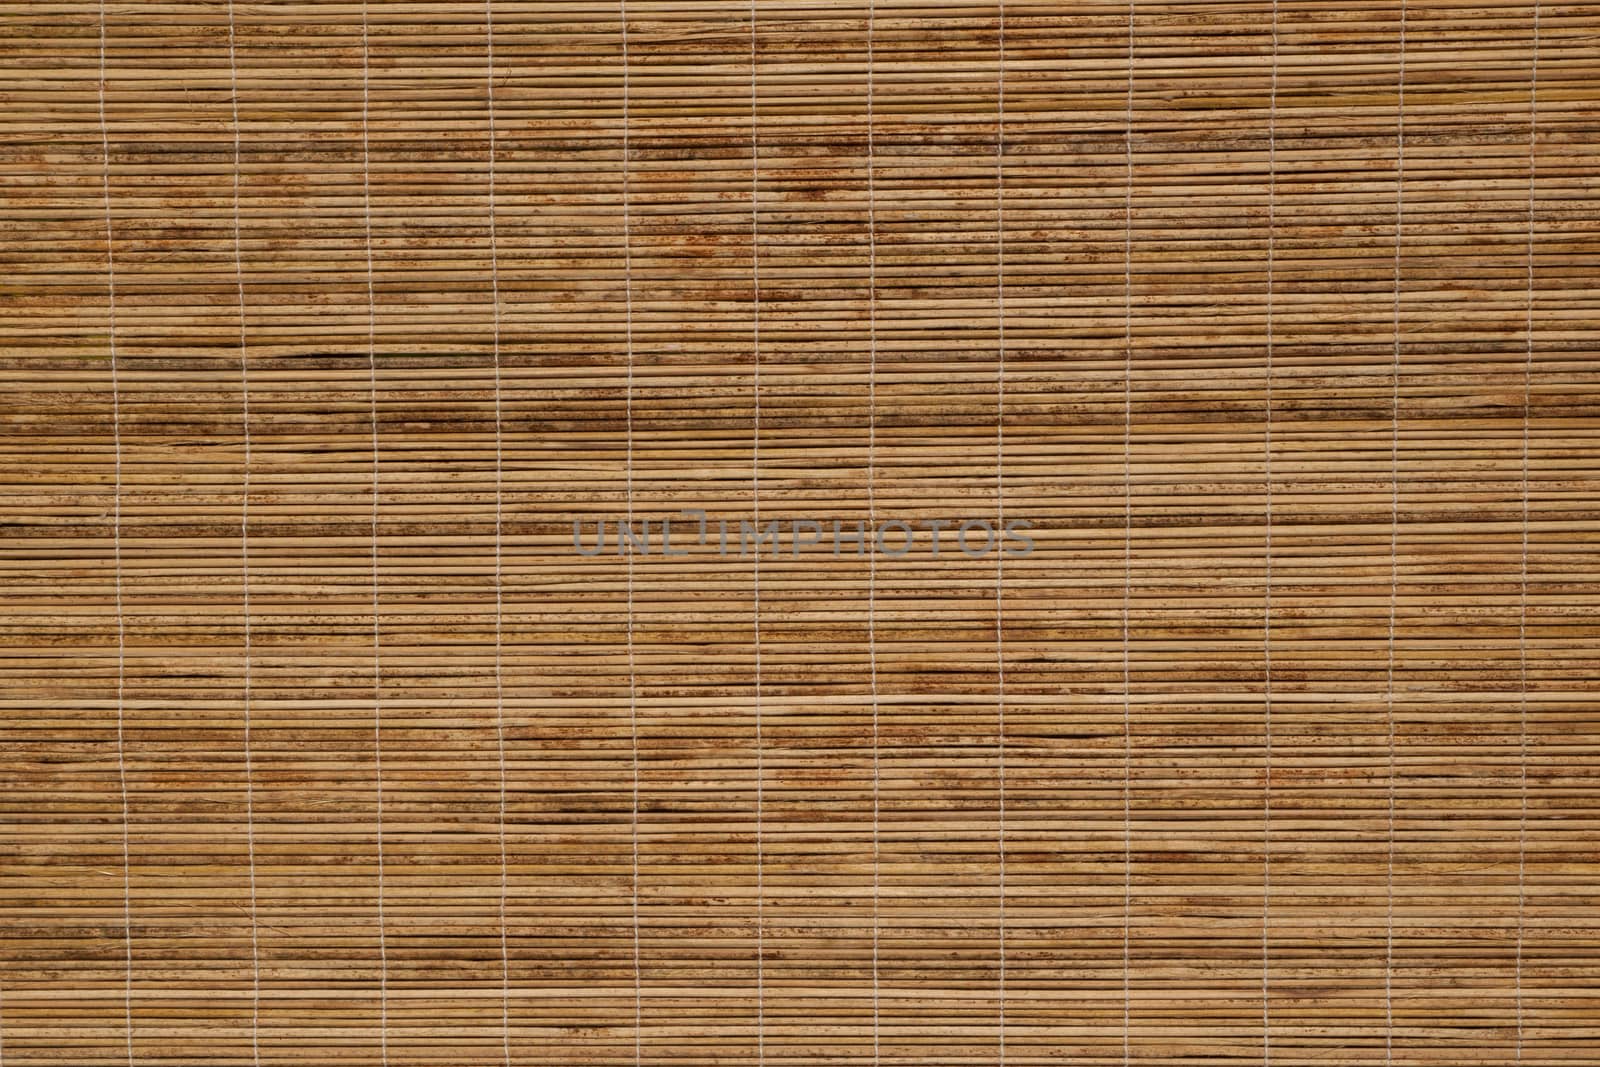 Pattern of bamboo blinds texture for background by asiandelight